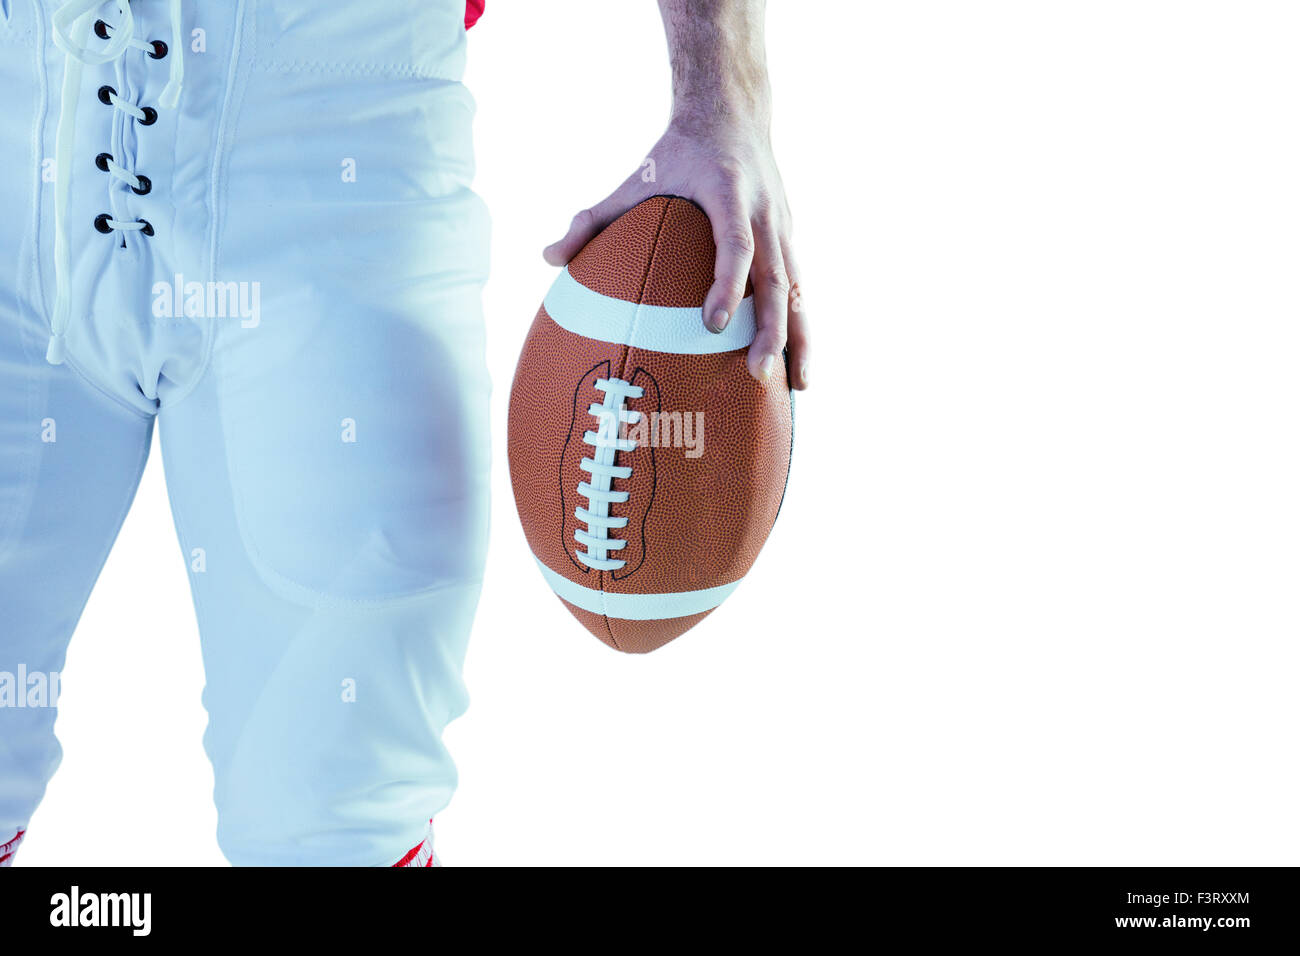 American football player holding football Banque D'Images